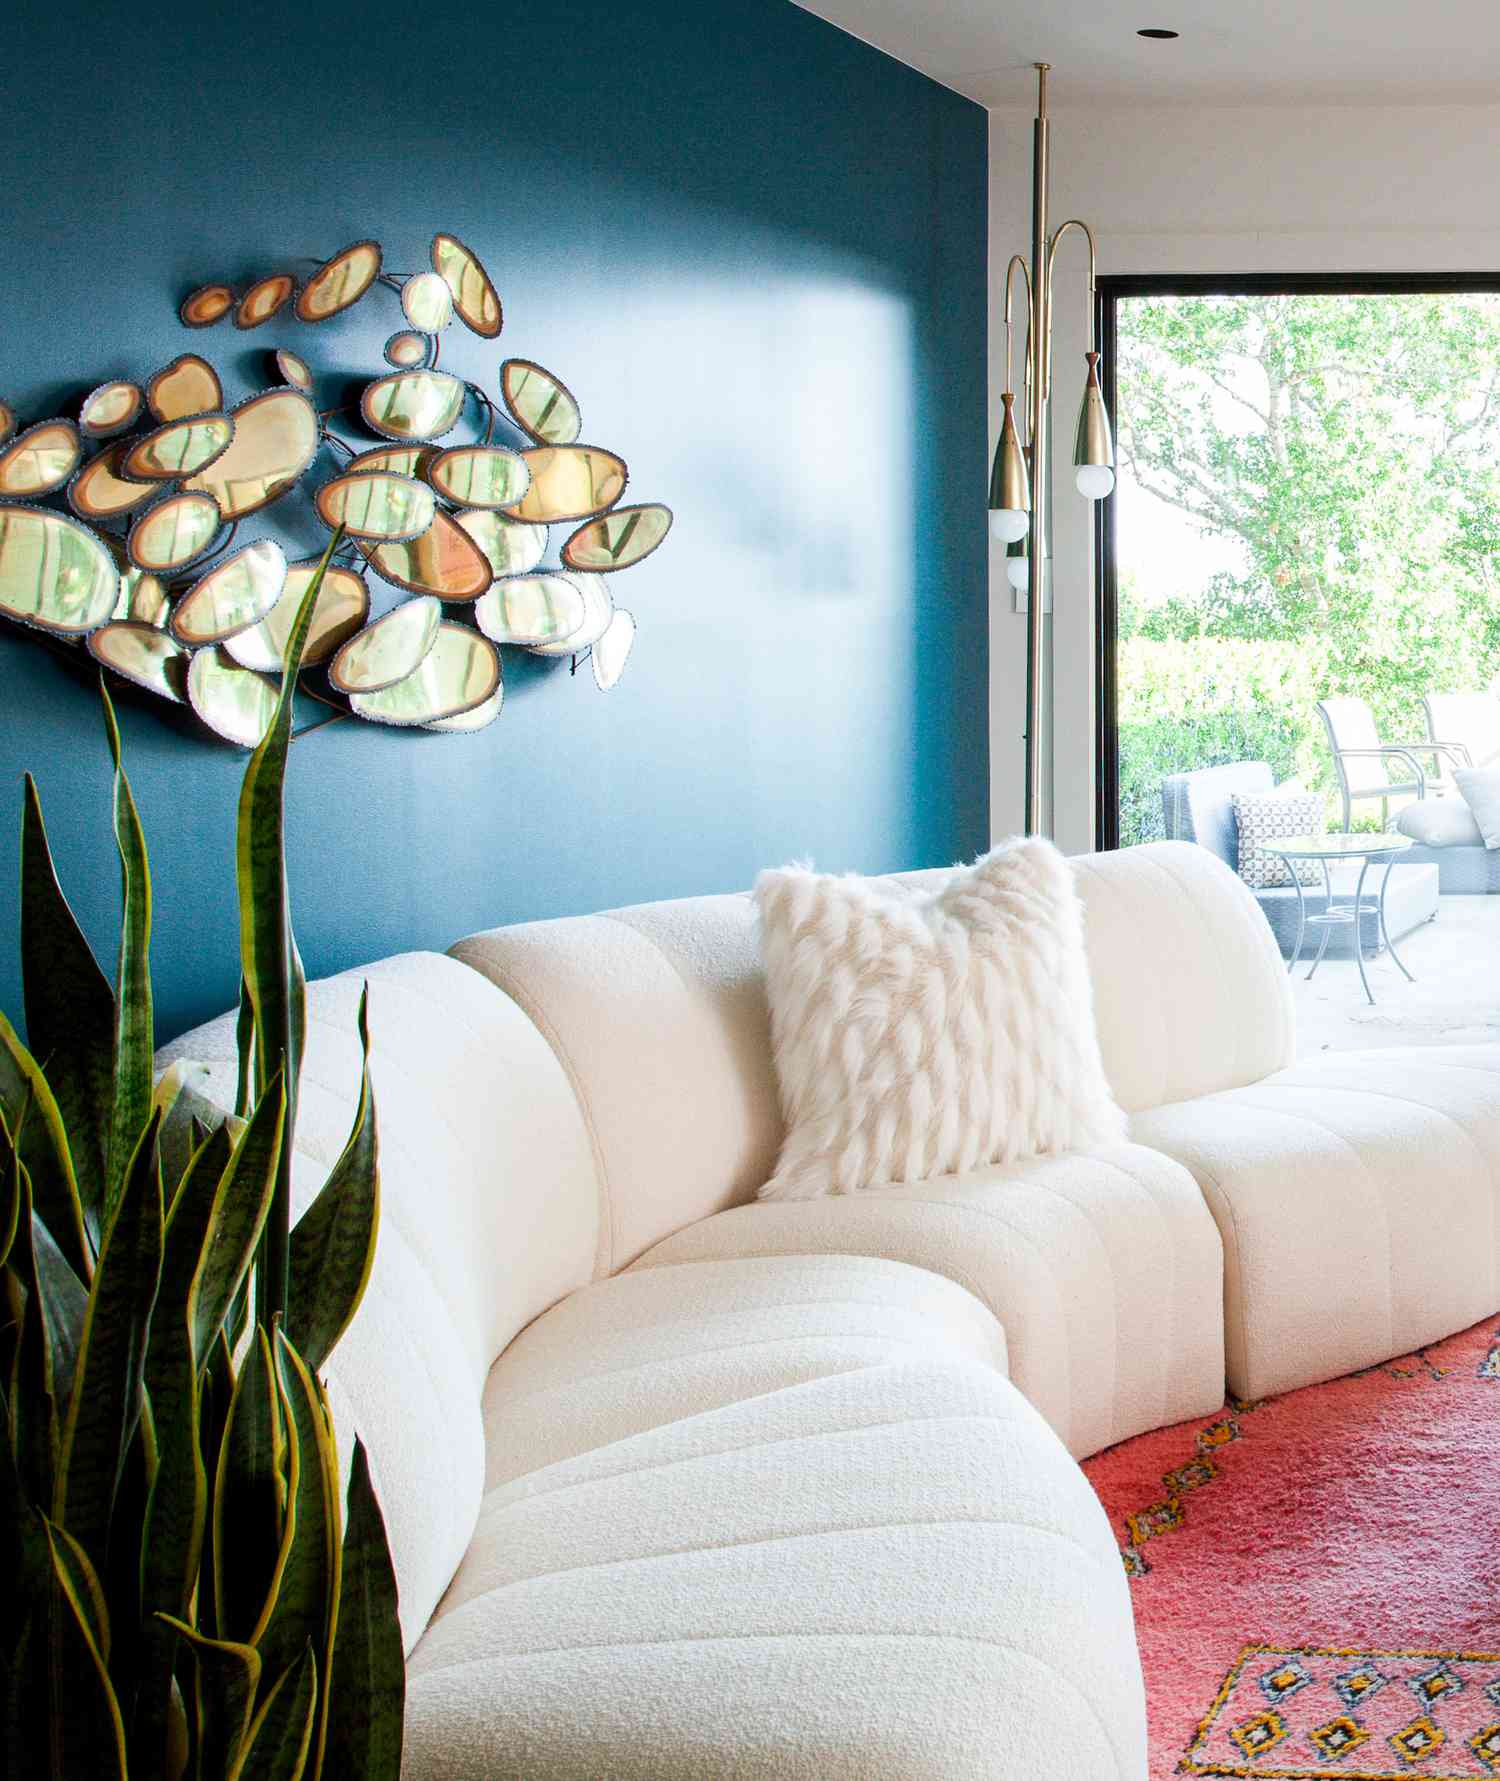 Teal accent wall with art